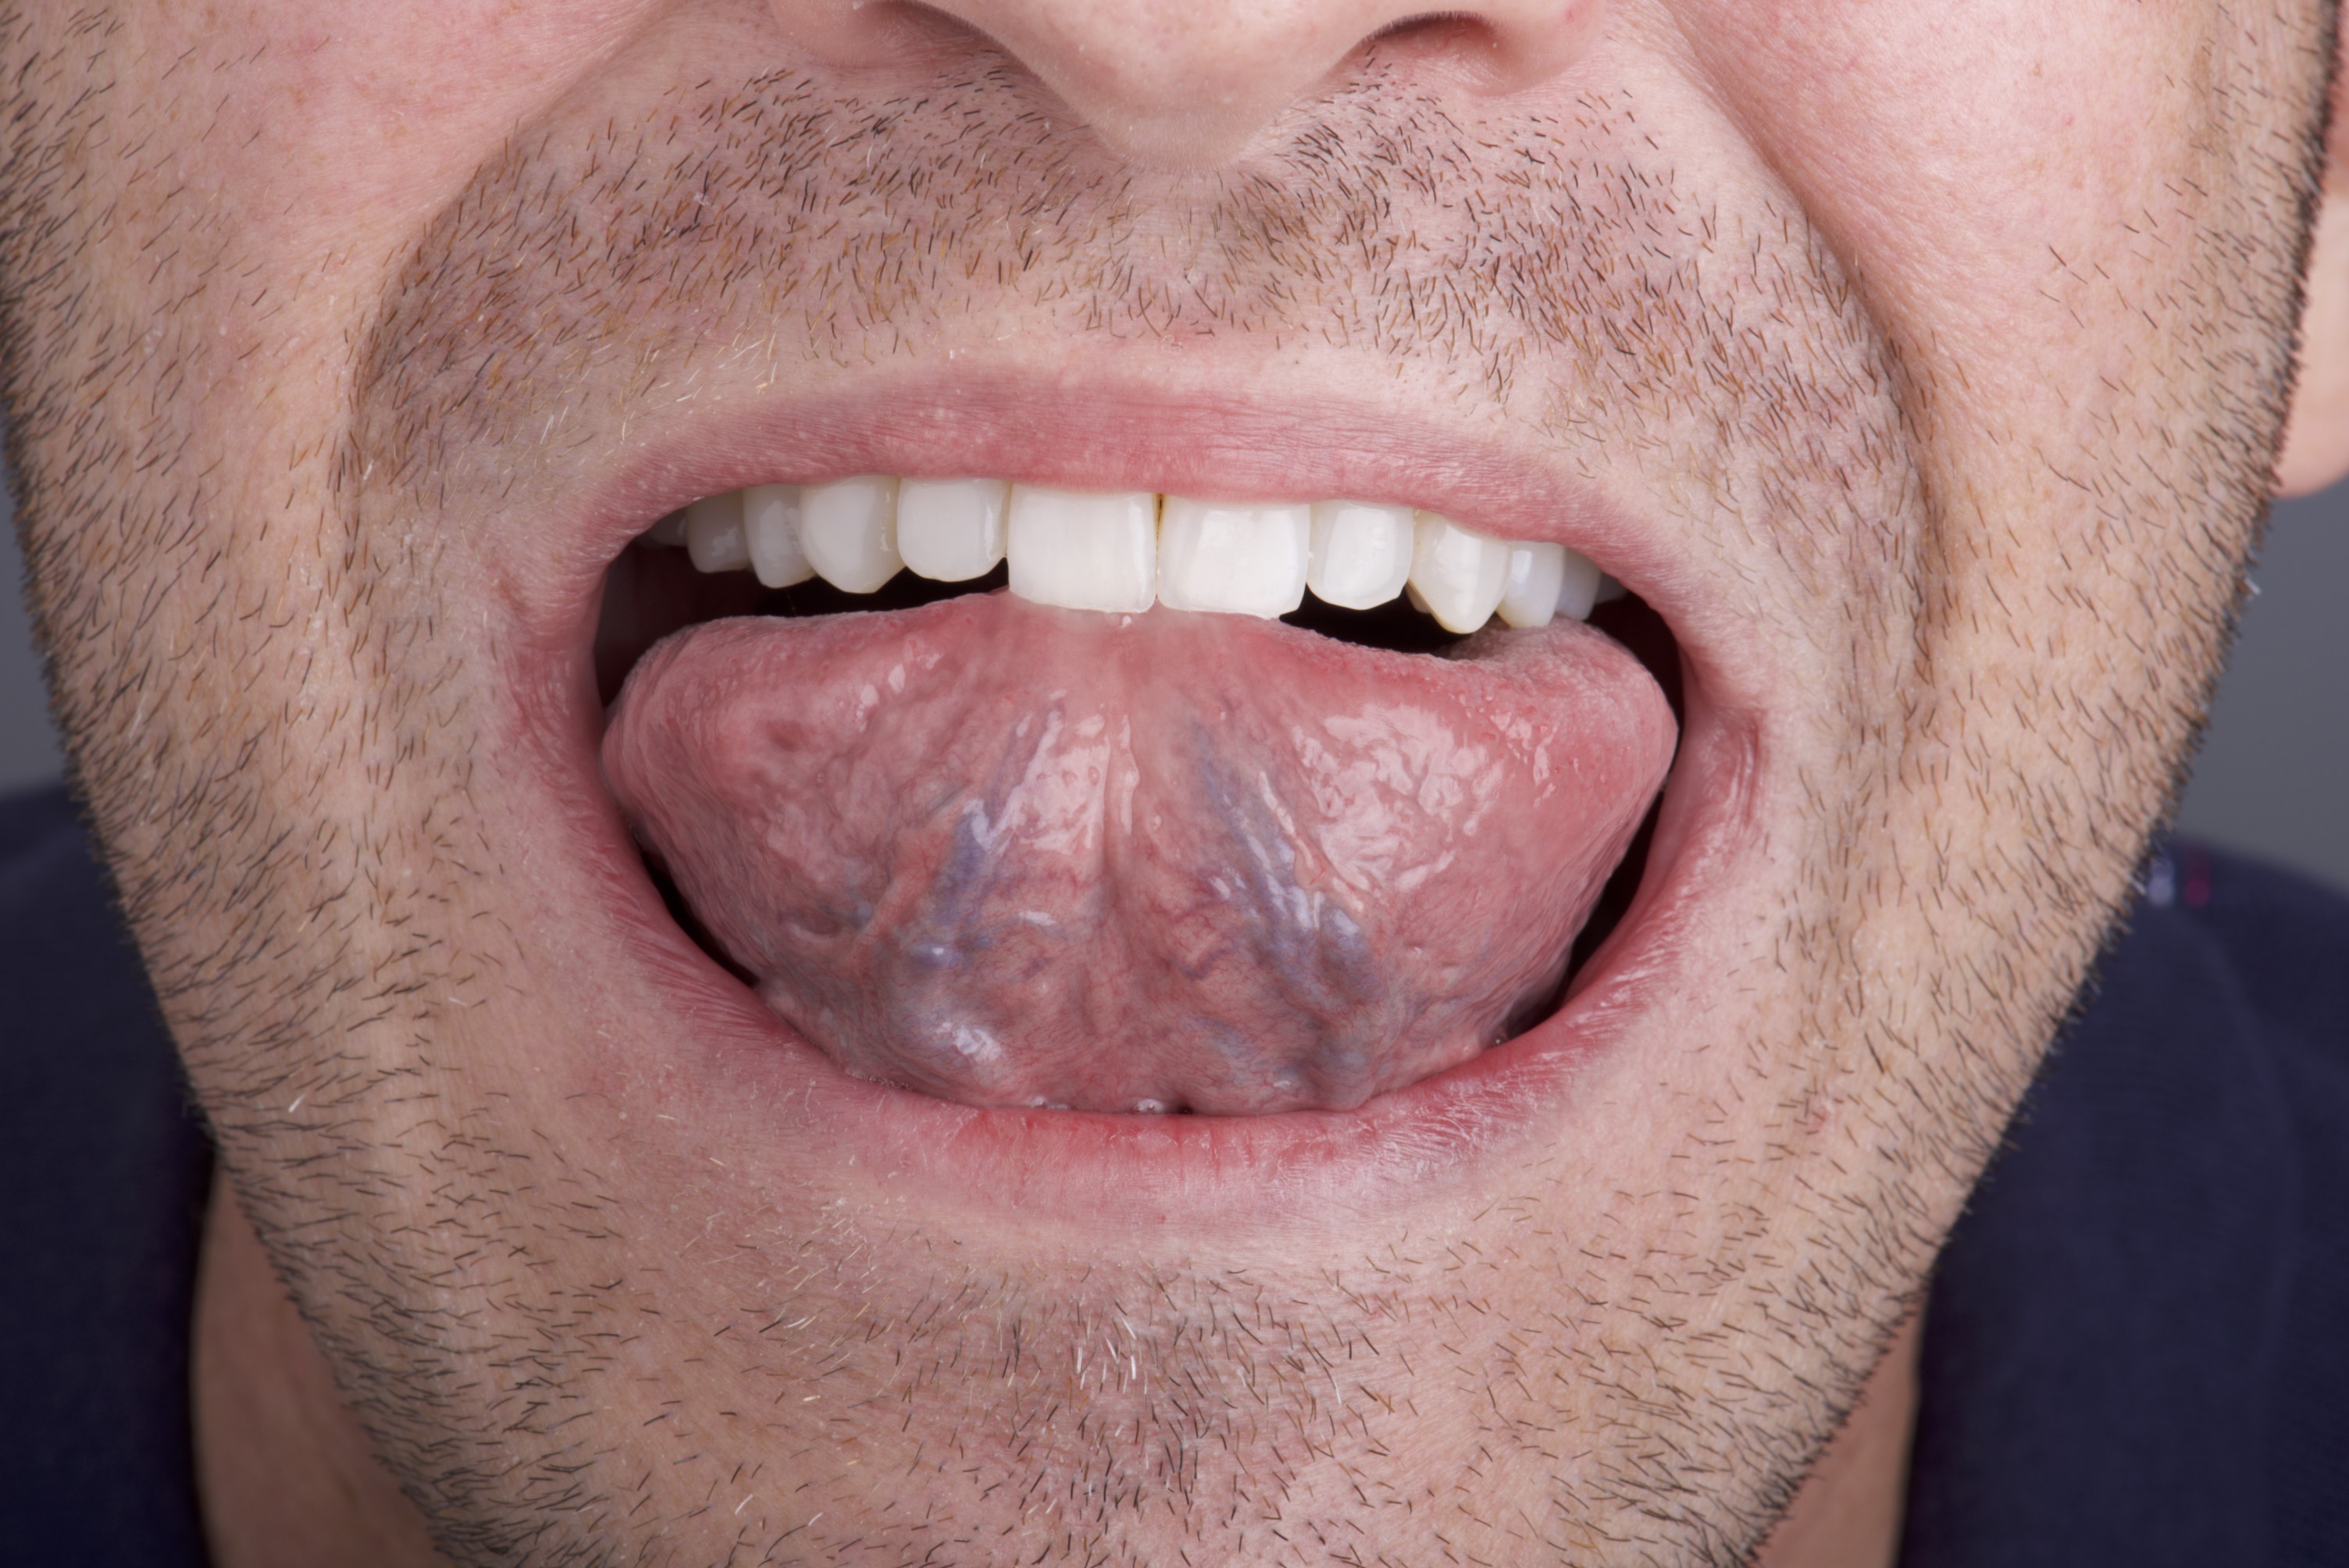 Undersurface Of Tongue 2 